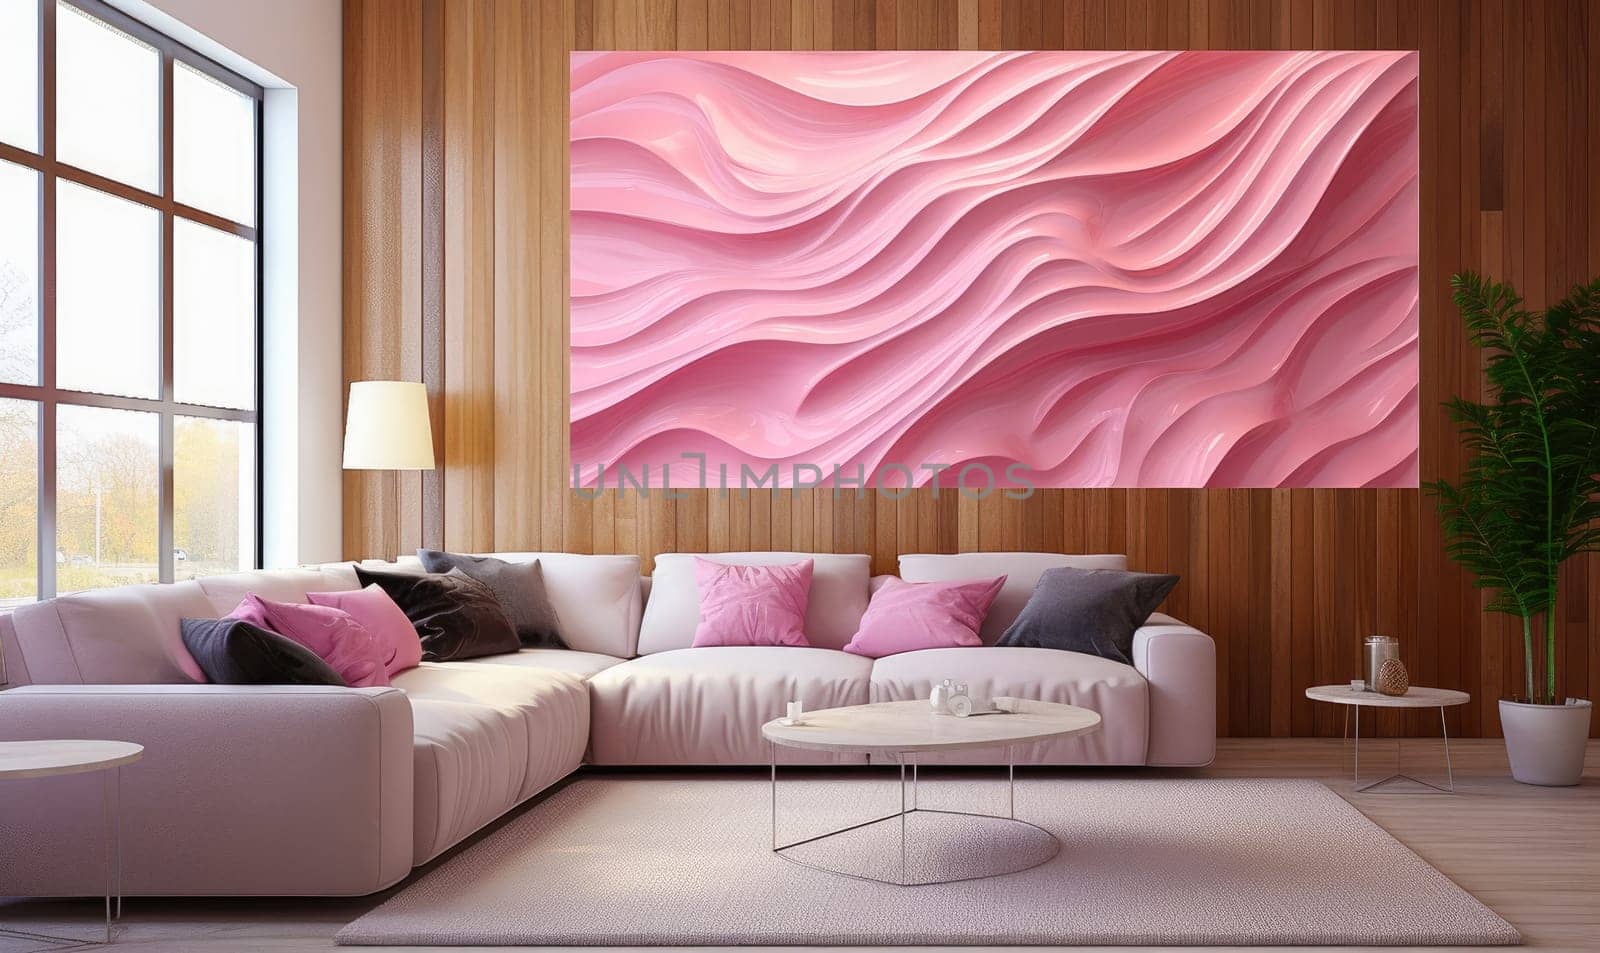 Modern room interior with an abstract painting in gray and pink tones. by Yurich32